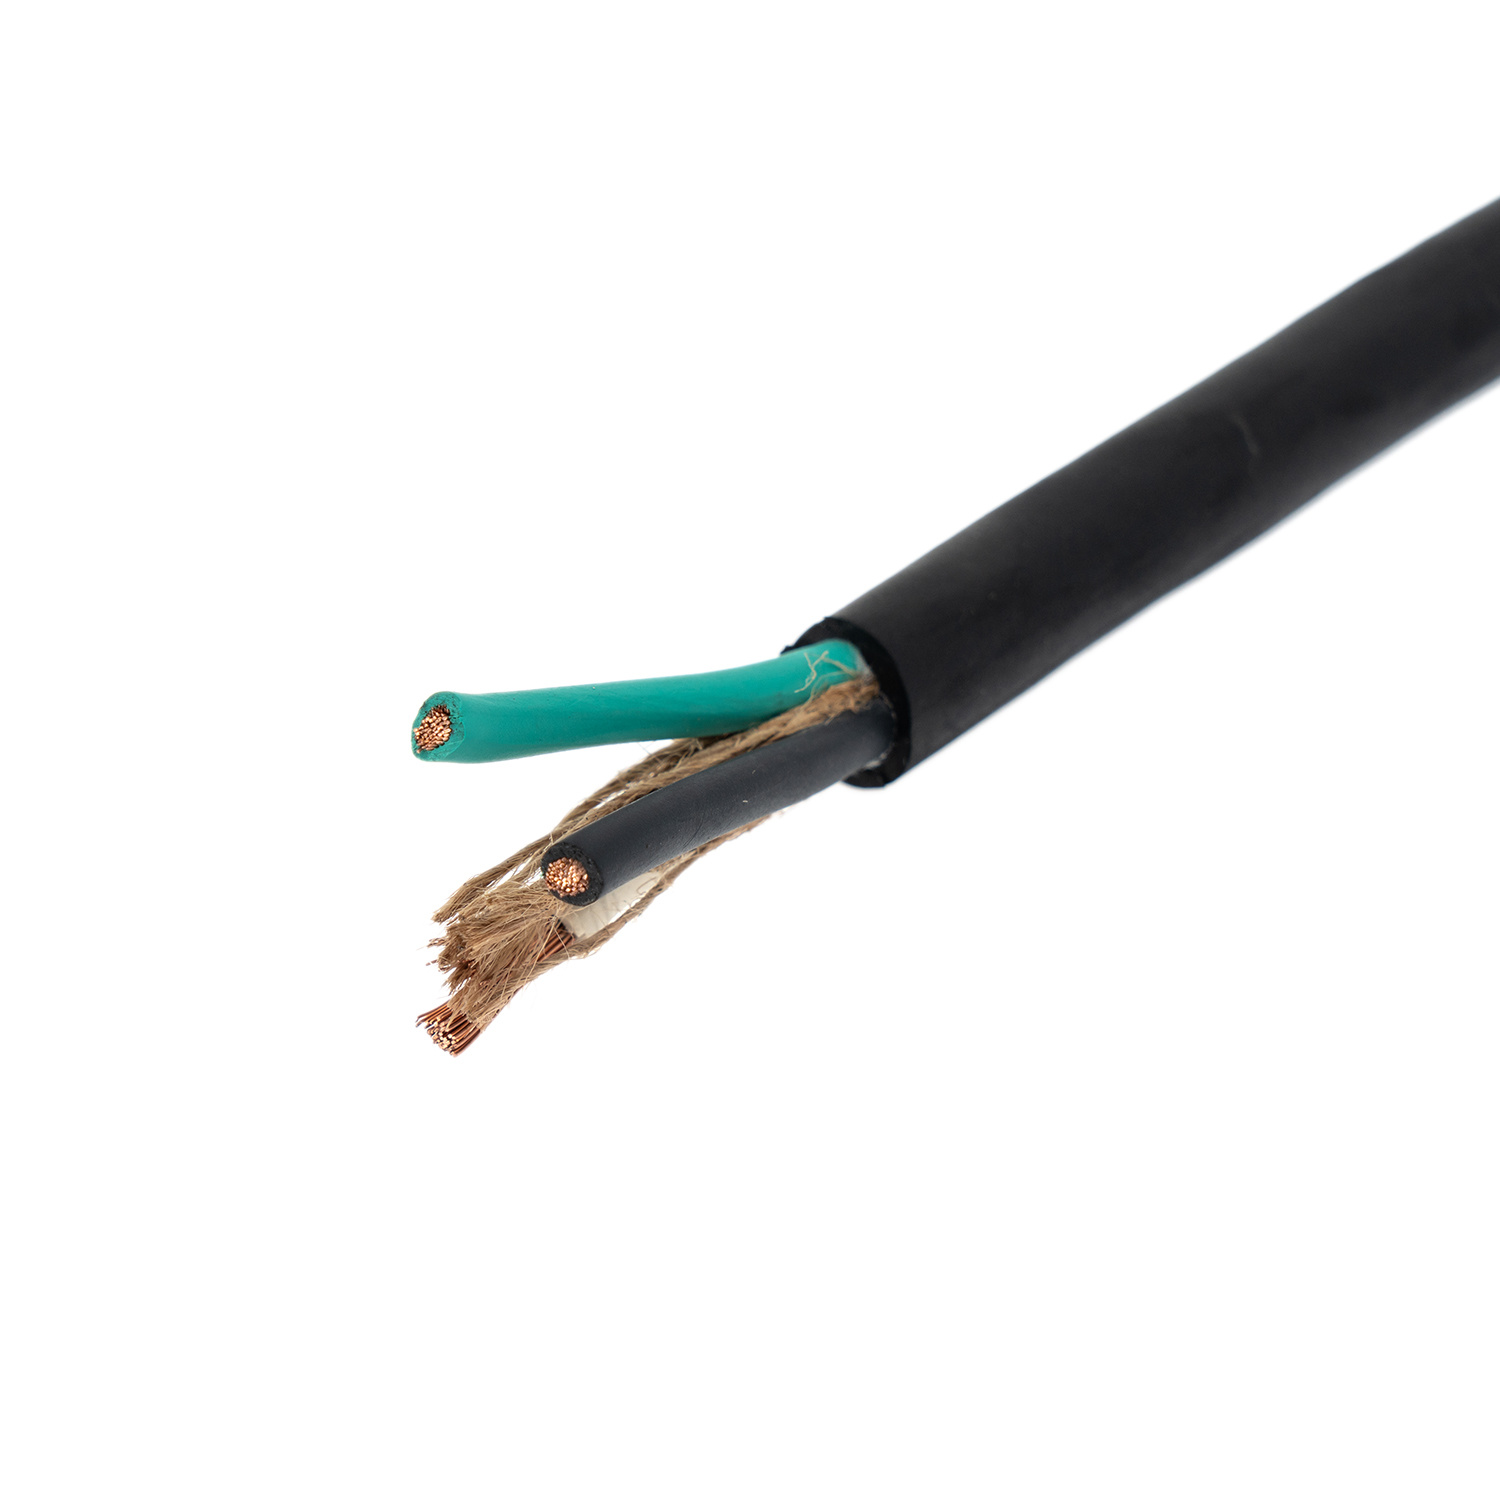 UL cUL Flexible Rubber Wire Type So/Sow/Soow/Sjoow EPDM Insulation Electric Cable 14/4